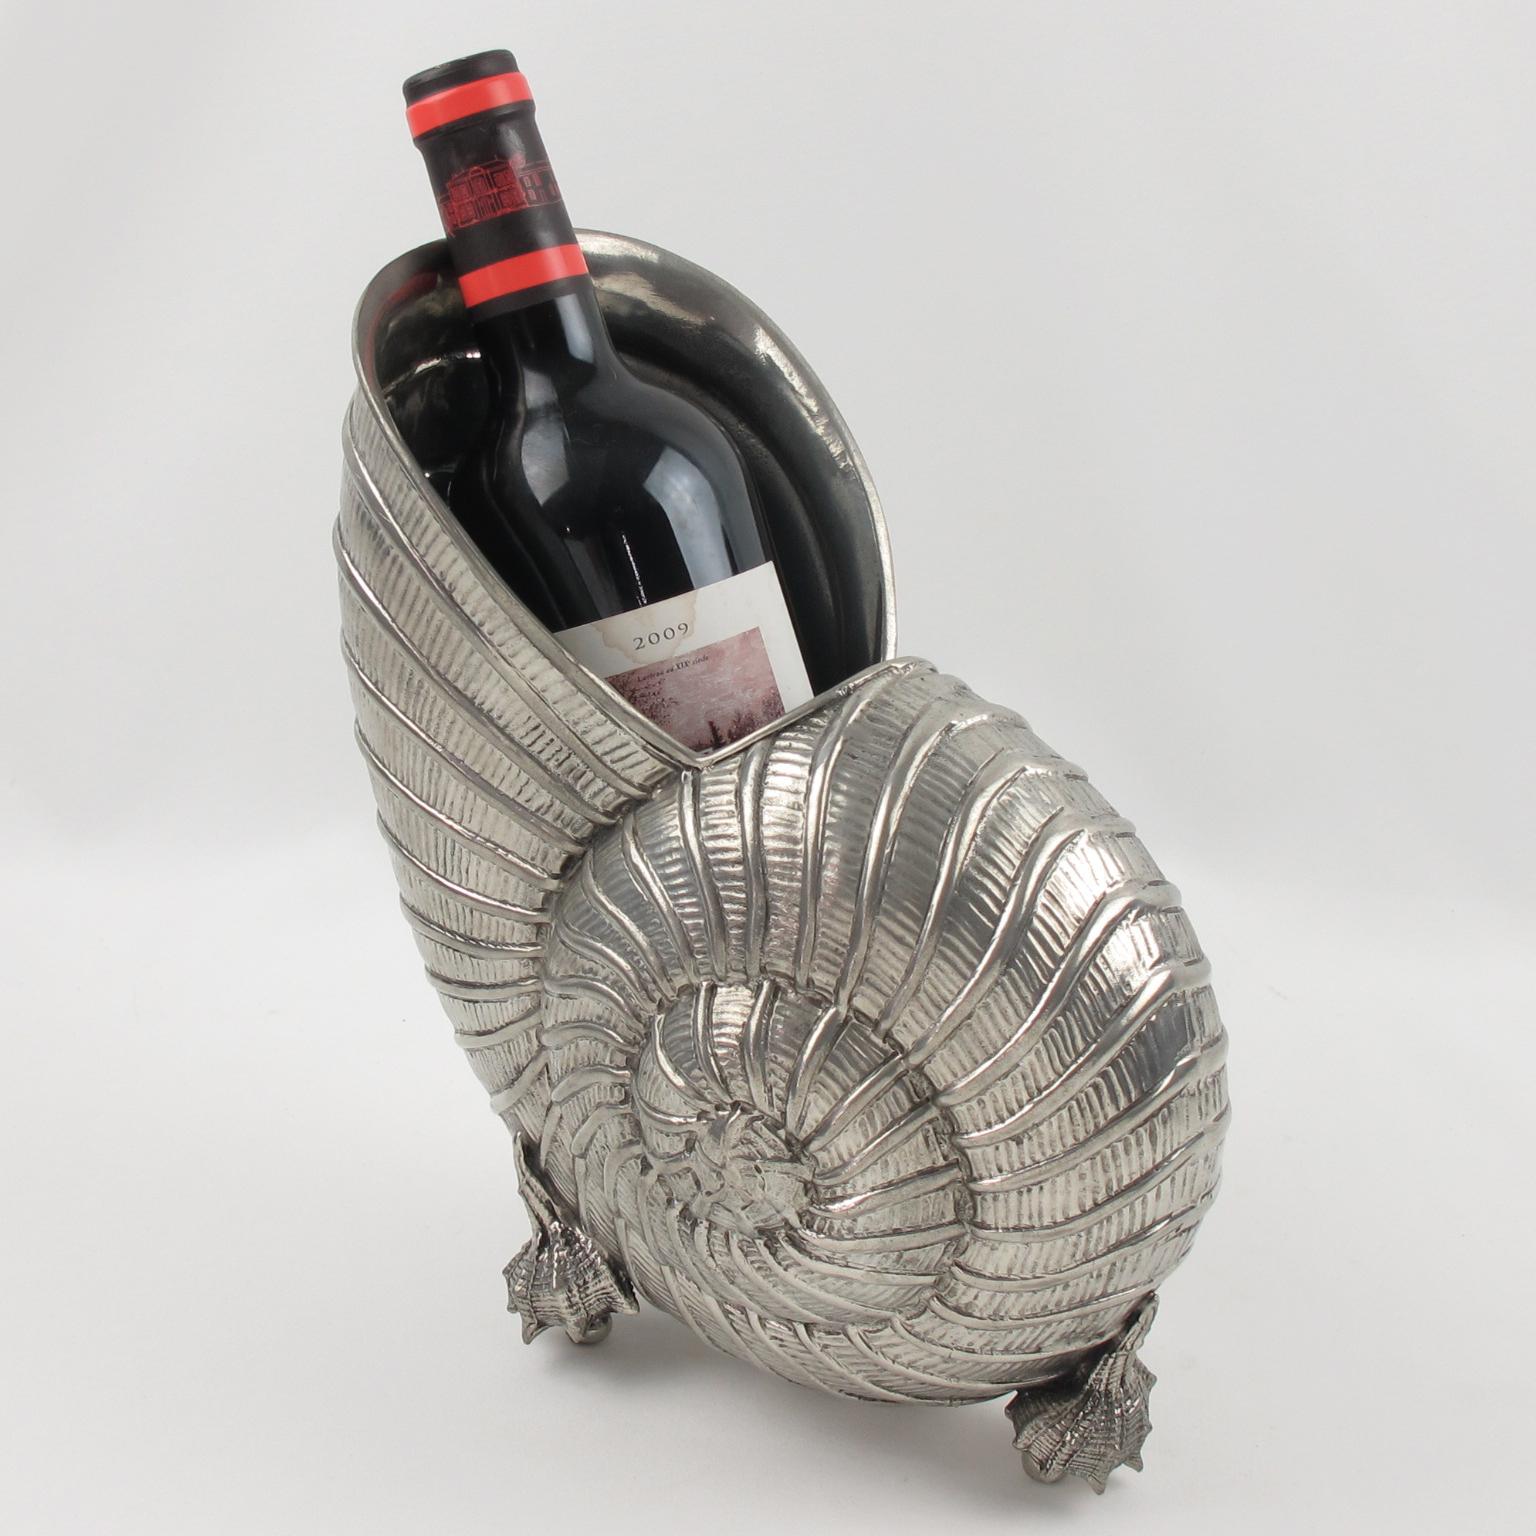 Stylish modernist chromed metal wine cooler or vase. This ultra chic bottle holder or champagne ice bucket features a whimsical sculpture of a large nautilus shell with three tiny seashells feet. Lots of character, bold lines and flawless